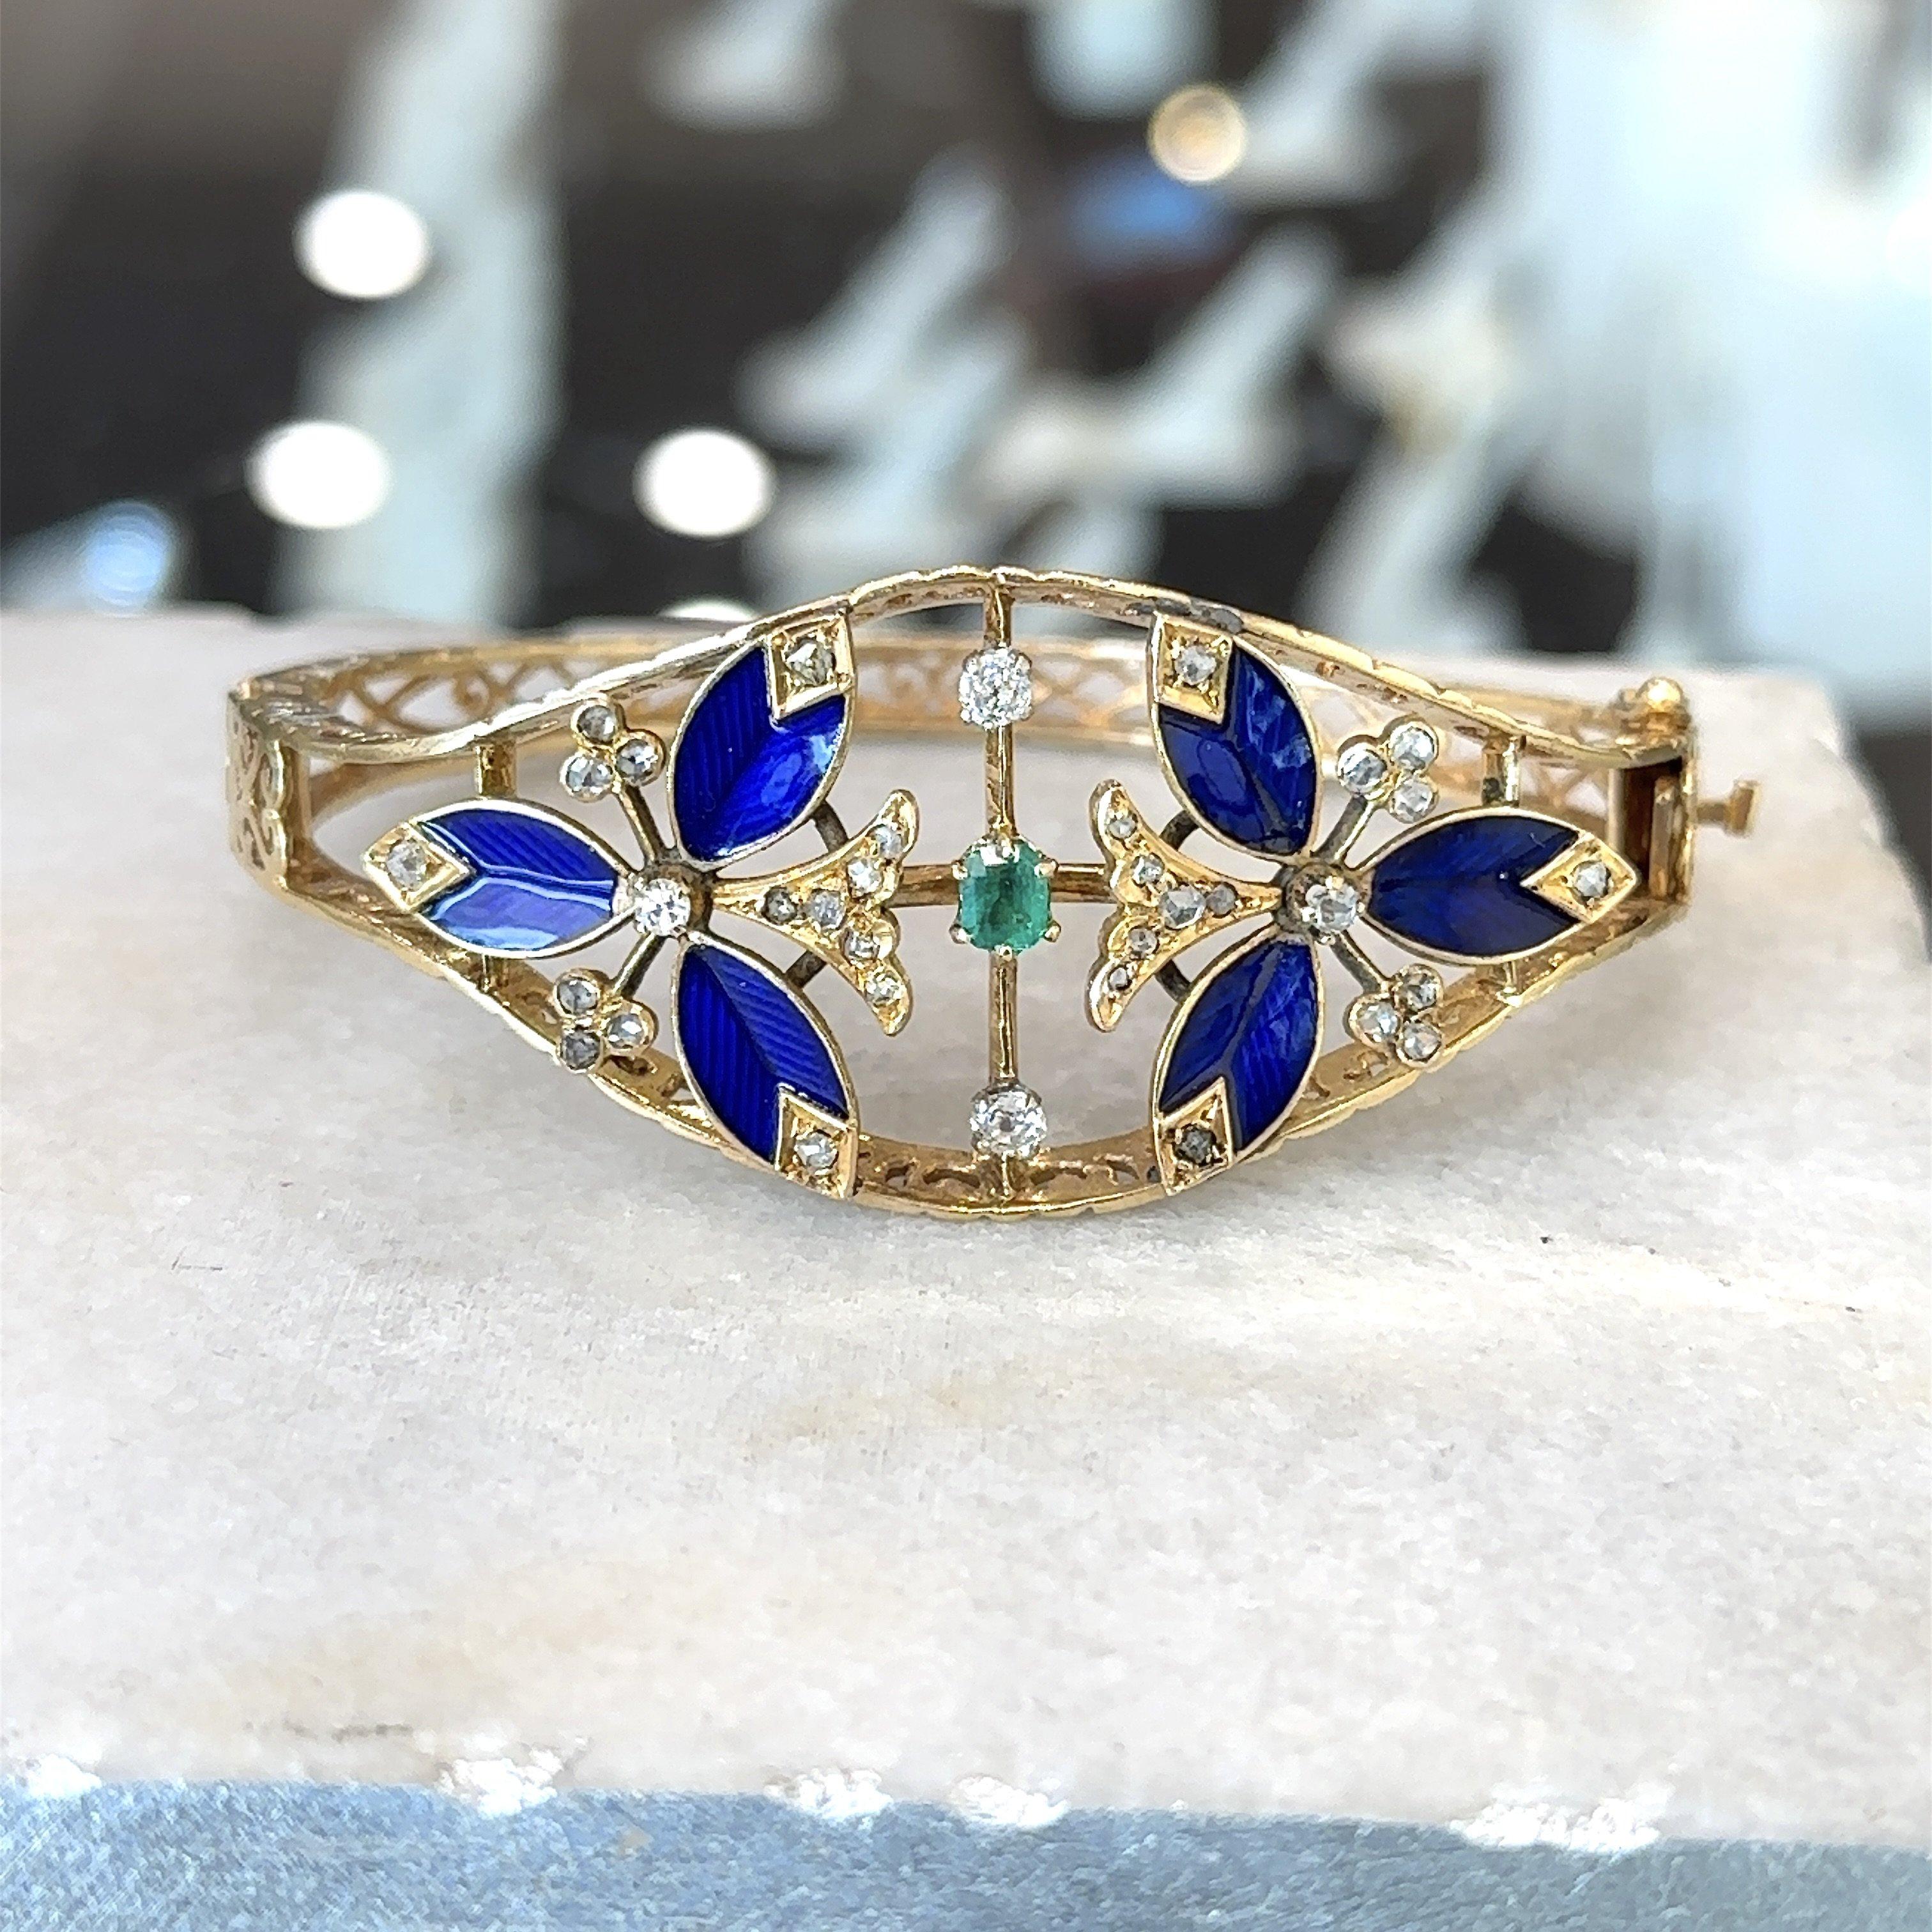 This beautiful hinged bangle bracelet dates from the 1950s. It is crafted from 14KT yellow gold with cobalt blue guilloche detailing and features approximately .70CT high crown rose-cut diamonds and one .35CT oval emerald. The decorative center of